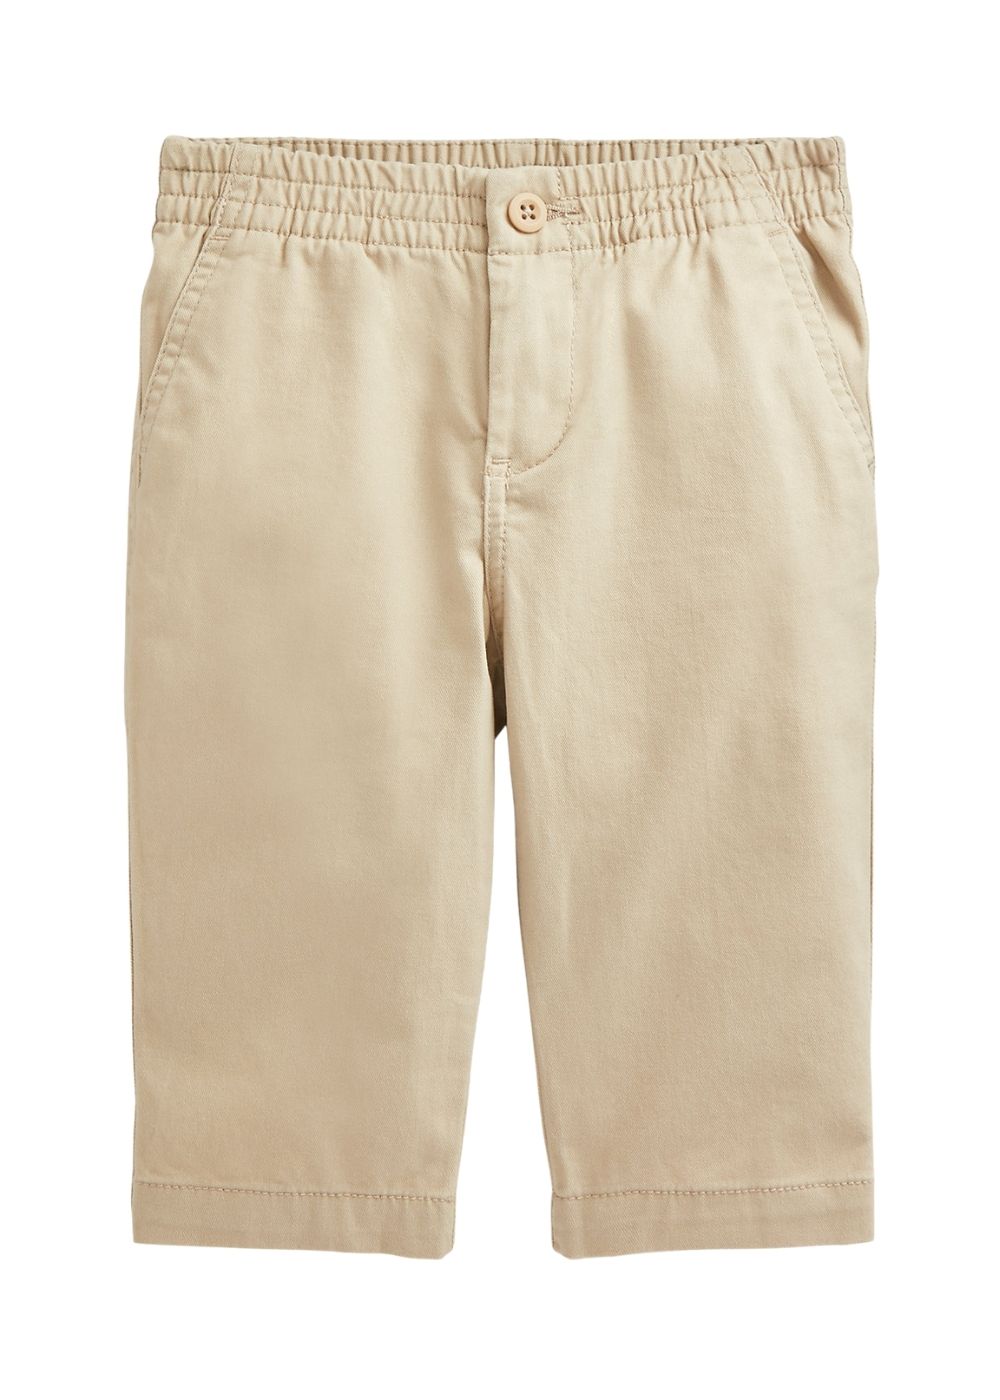 Featured image for “POLO RALPH LAUREN PANTALONI IN TWILL STRETCH”